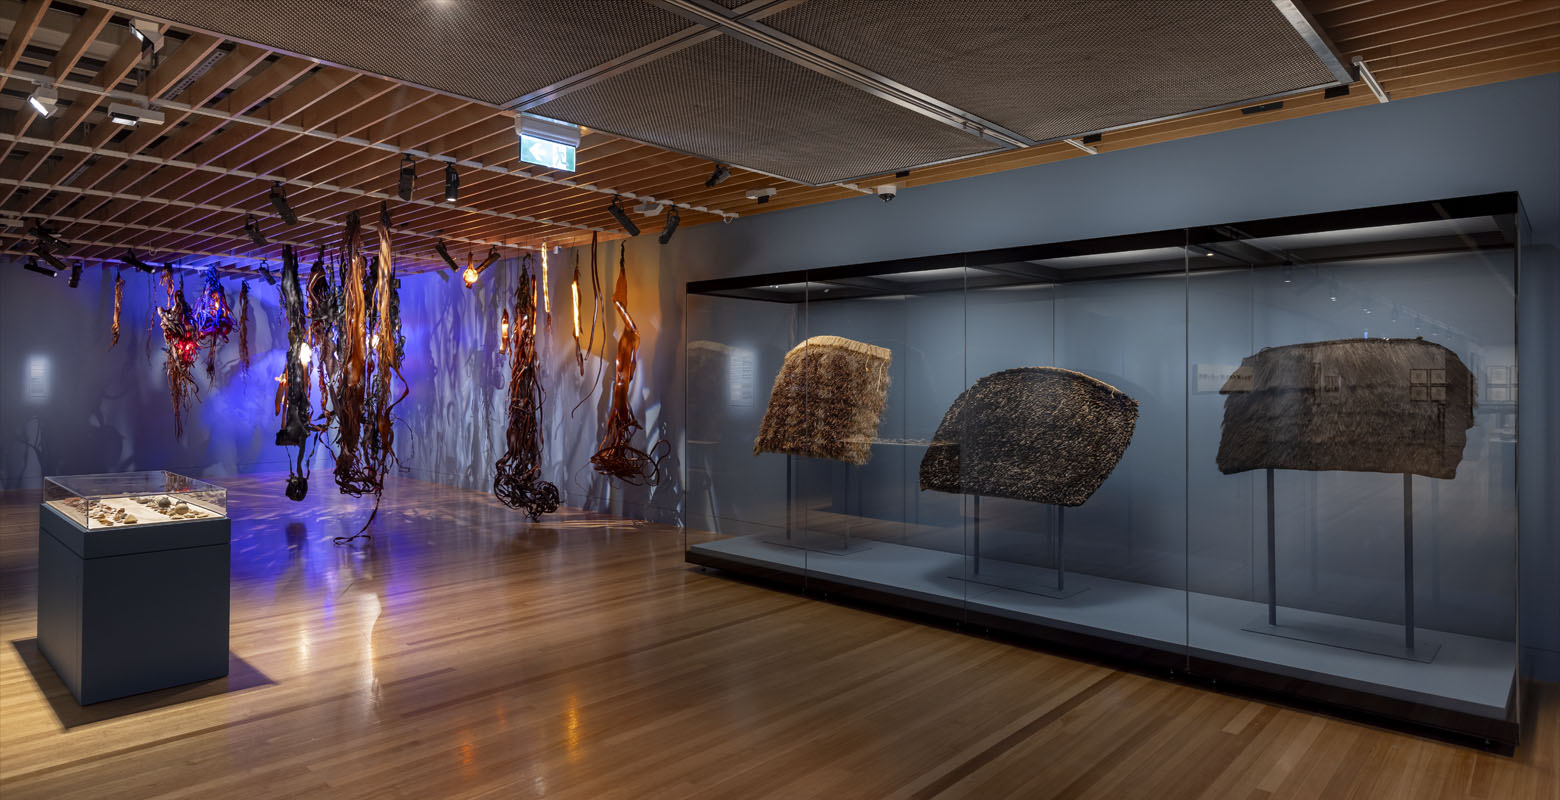 General view of the This Natural World exhibition, with a small display case at the front, a large one at the back displaying three large Māori cloaks, and to the left of that an artwork consisting of hanging pieces of kelp and neon lights